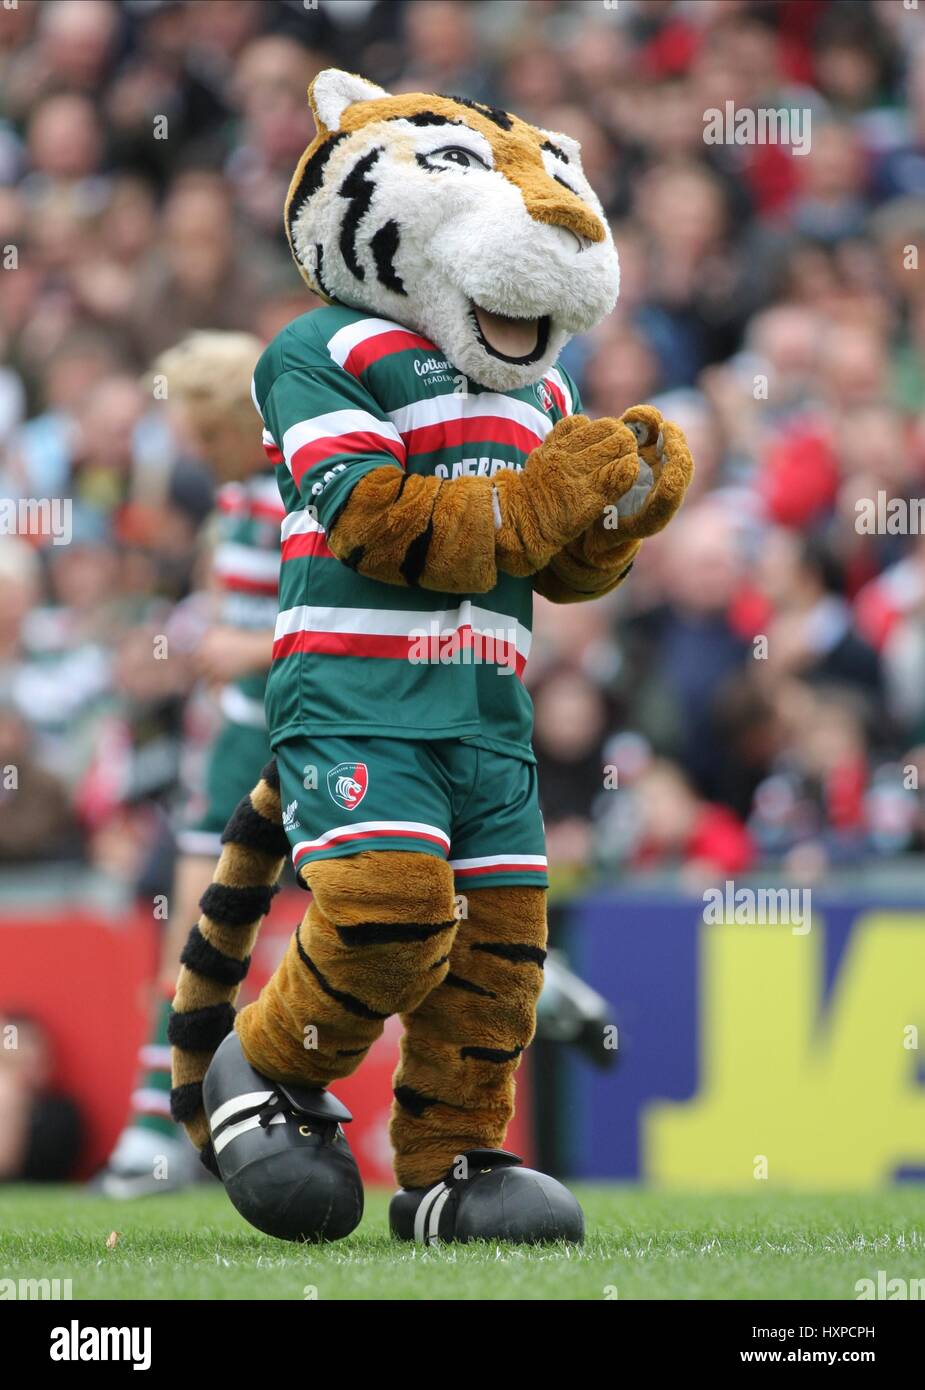 LEICESTER TIGER LEICESTER TIGERS RU Maskottchen WELFORD ROAD LEICESTER ENGLAND 3. Oktober 2009 Stockfoto